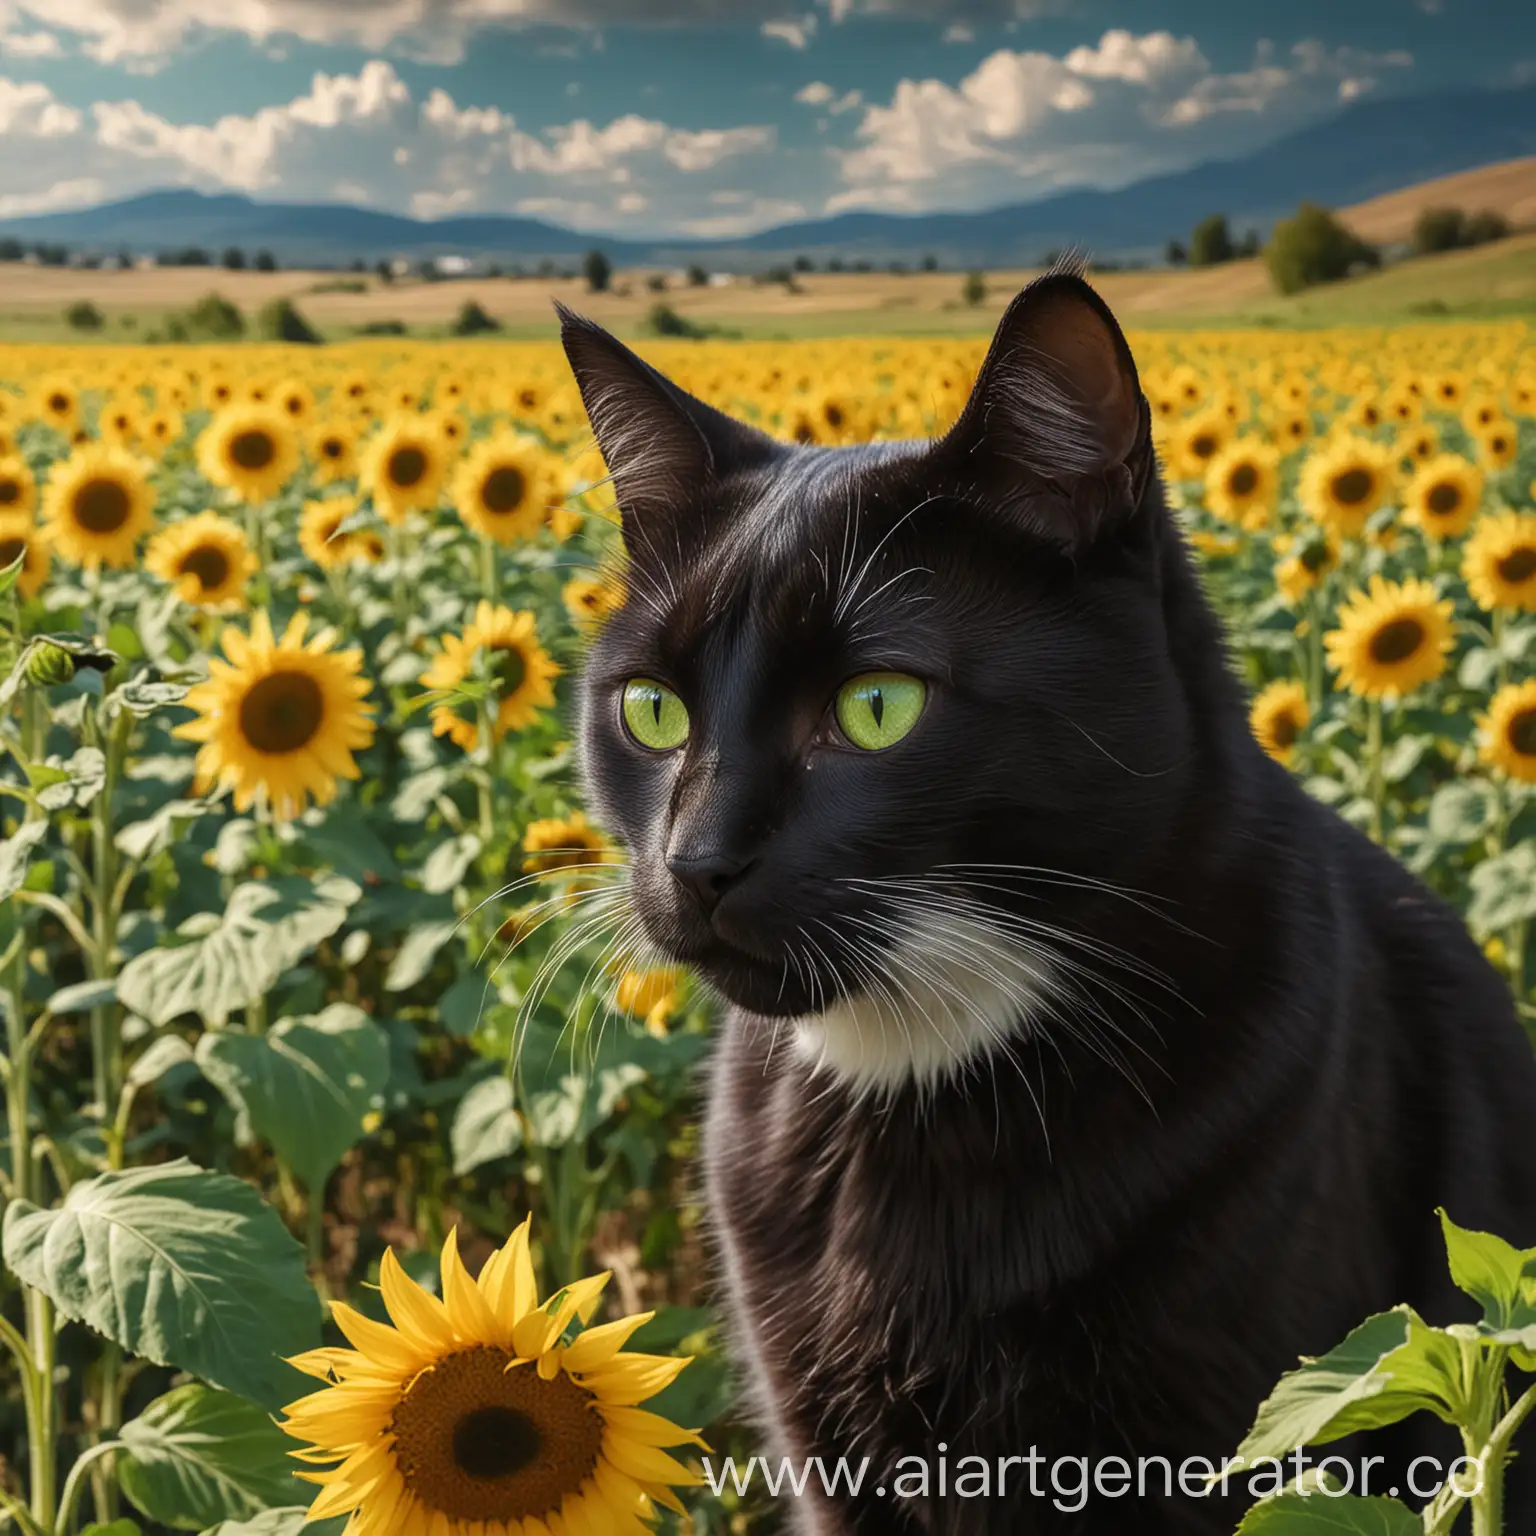 A black cat with a white muzzle and green eyes thoughtfully looks at the field of sunflowers